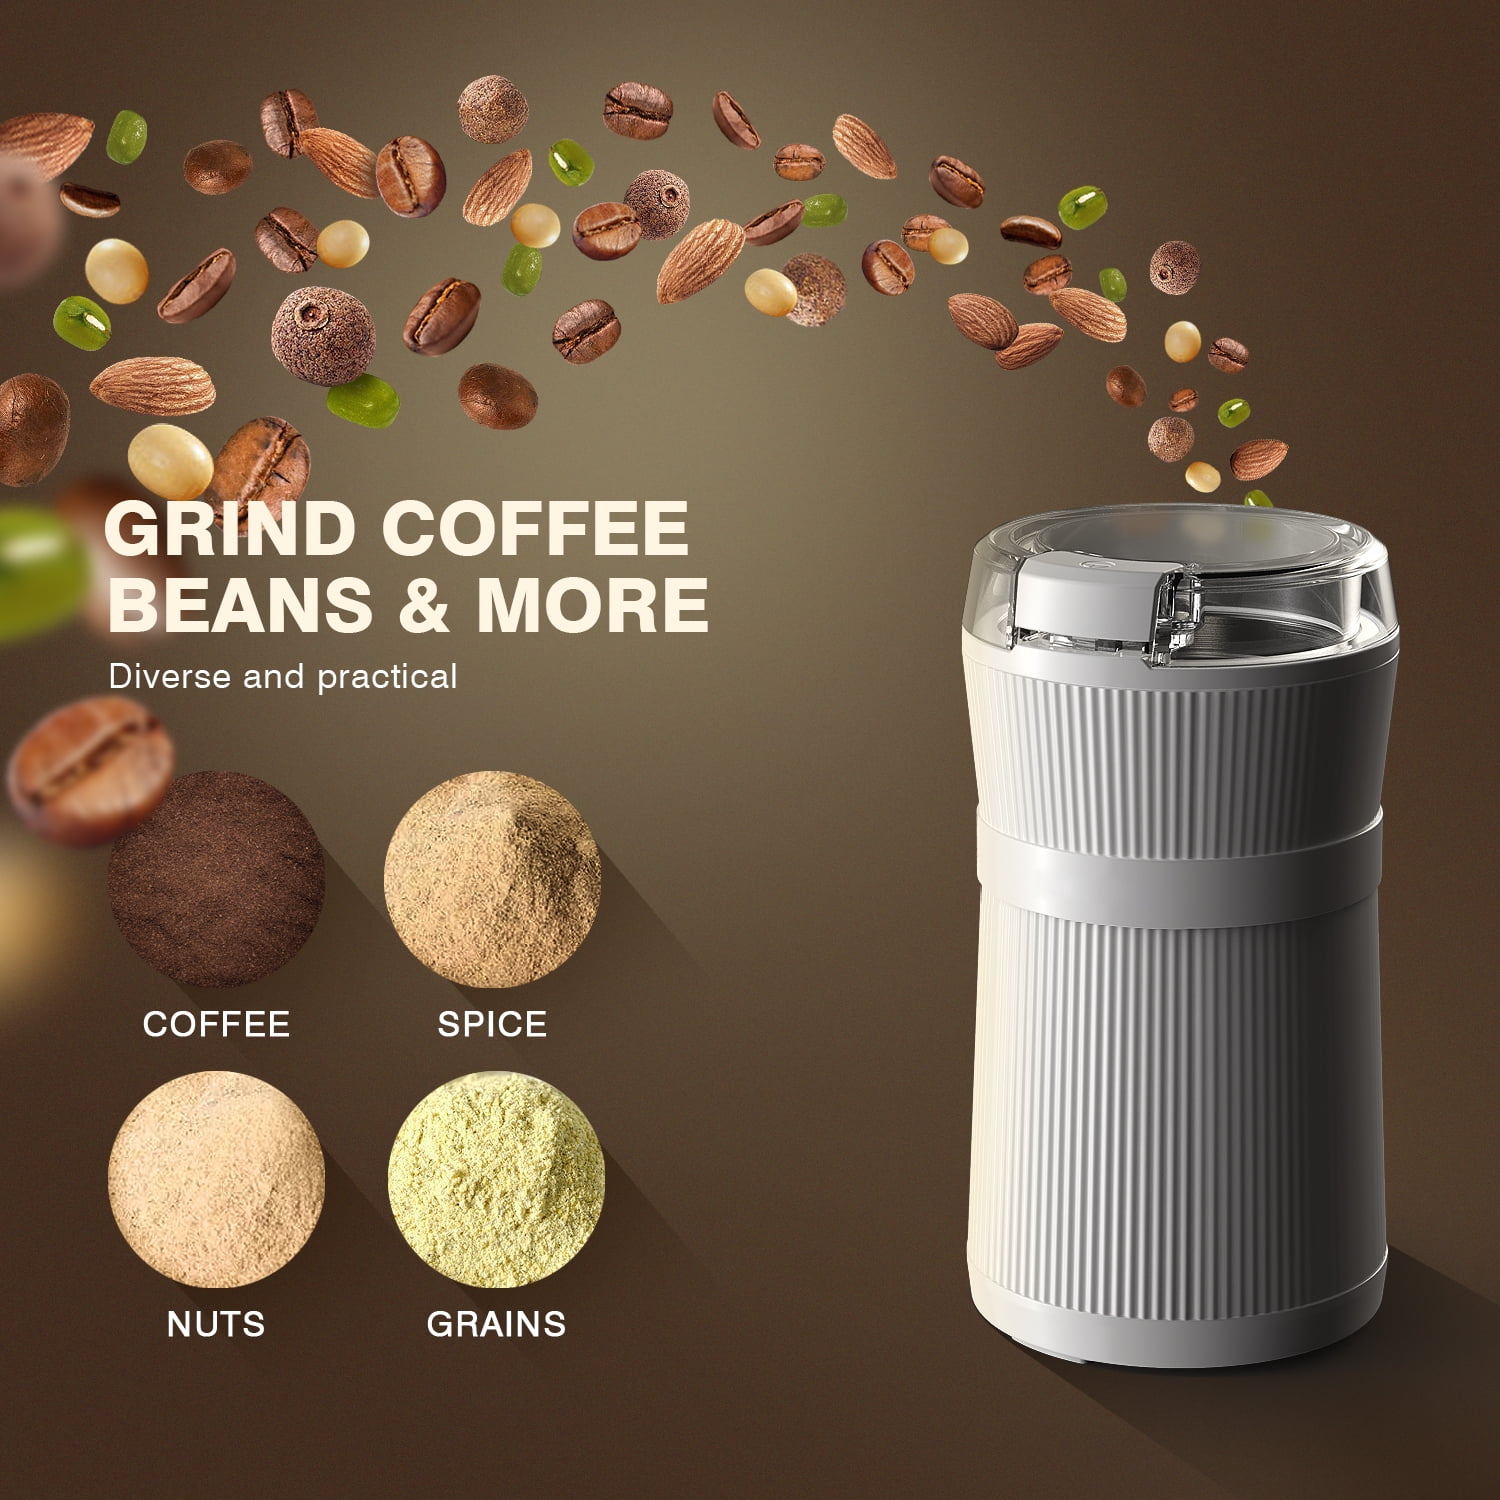 Homitt Coffee Grinder Electric Coffee Bean Grinder with Fast Motor and 301 Stainless Steel Blade for Evenly and Versatile Grinding-One Touch Design Support Home and Office Portable Use 